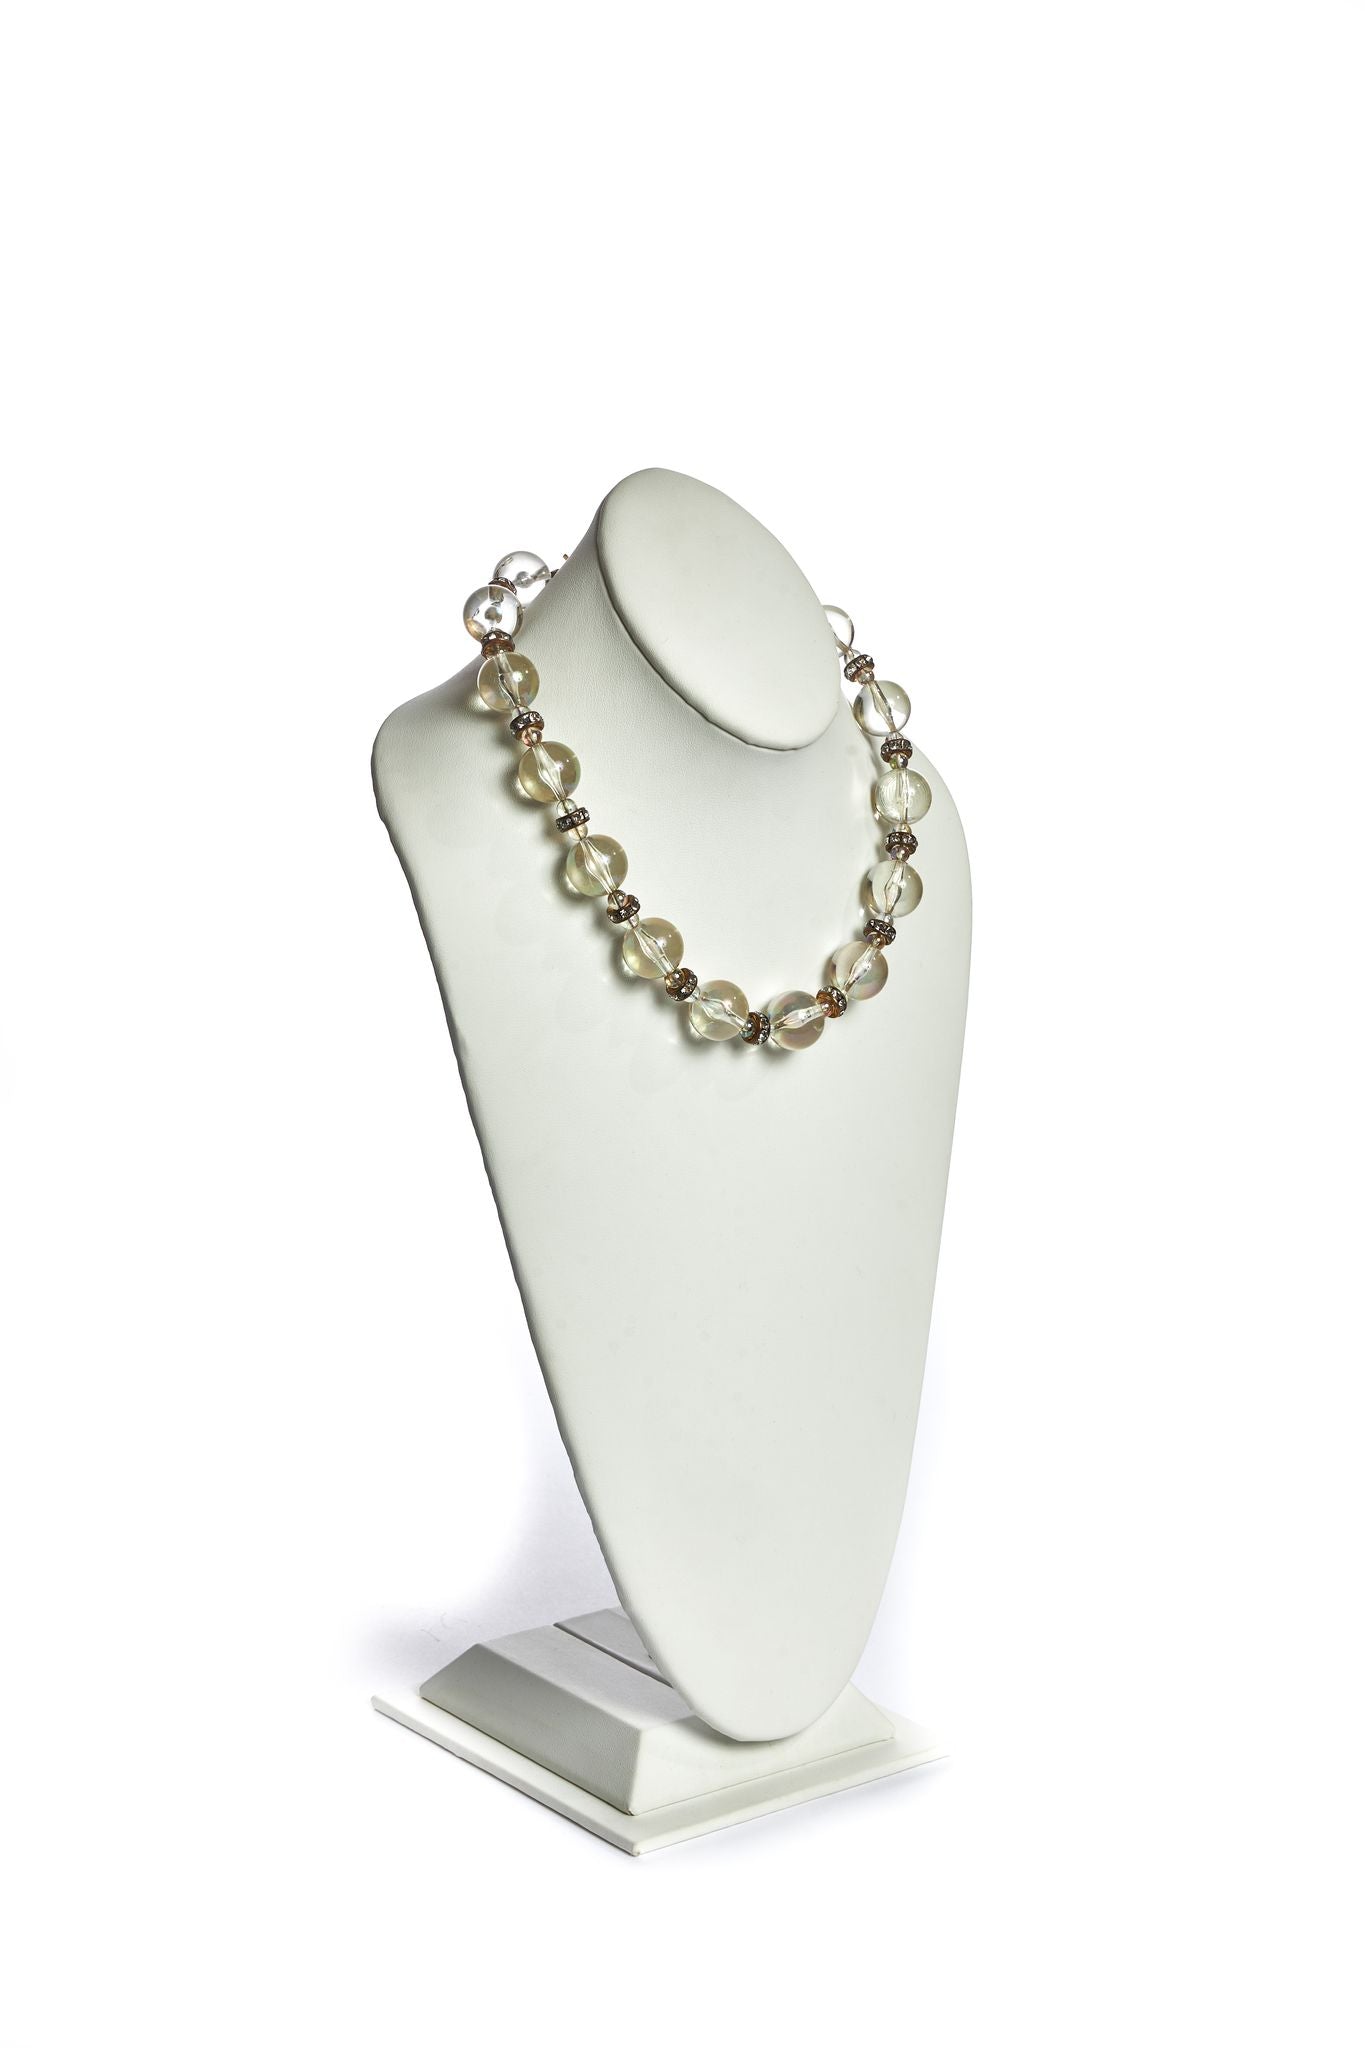 Chanel Crystal Cc Necklace Gold Pearly Fashion Jewelry Auction